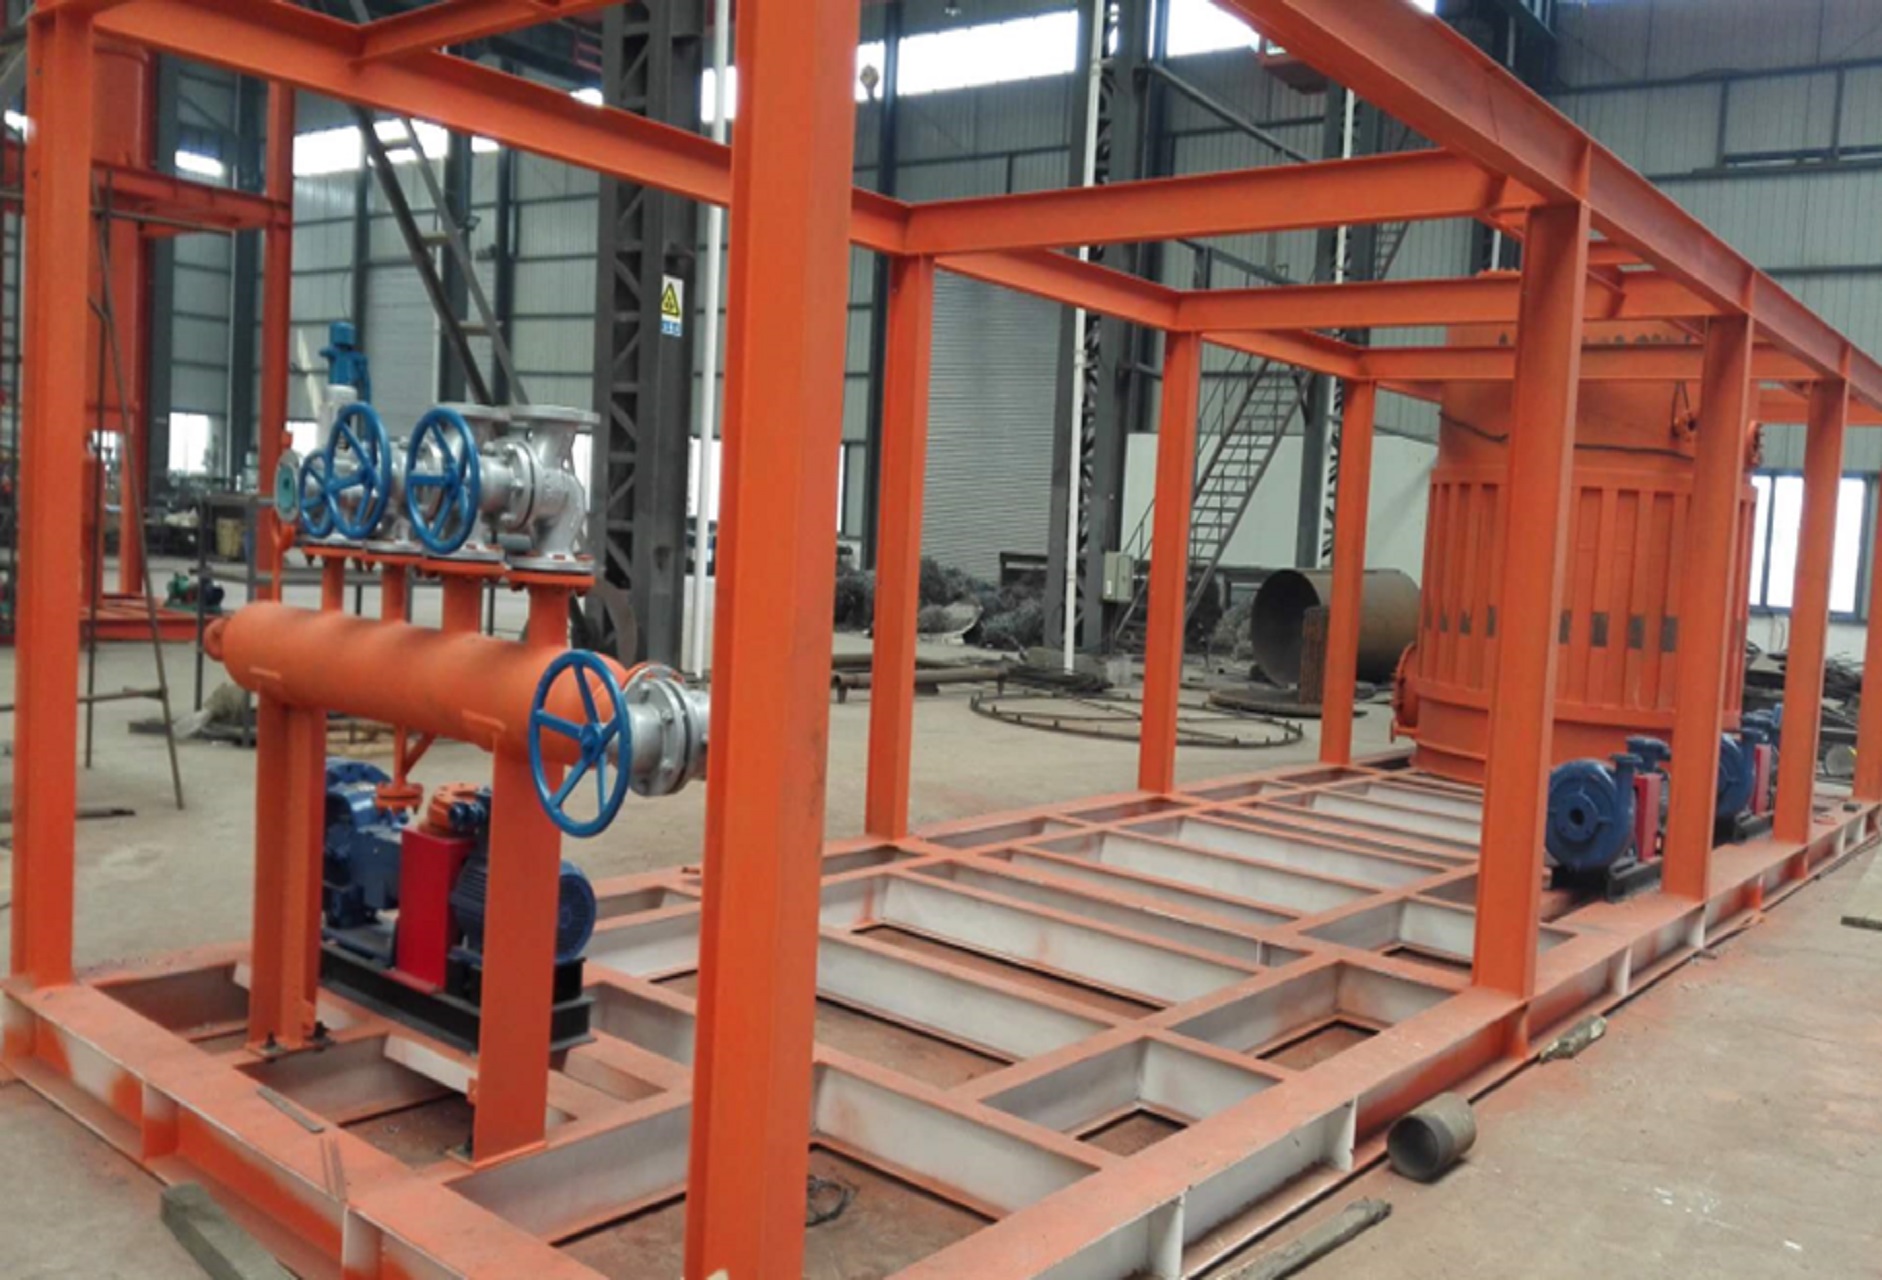 Designing and manufacturing of skid-mounted equipment